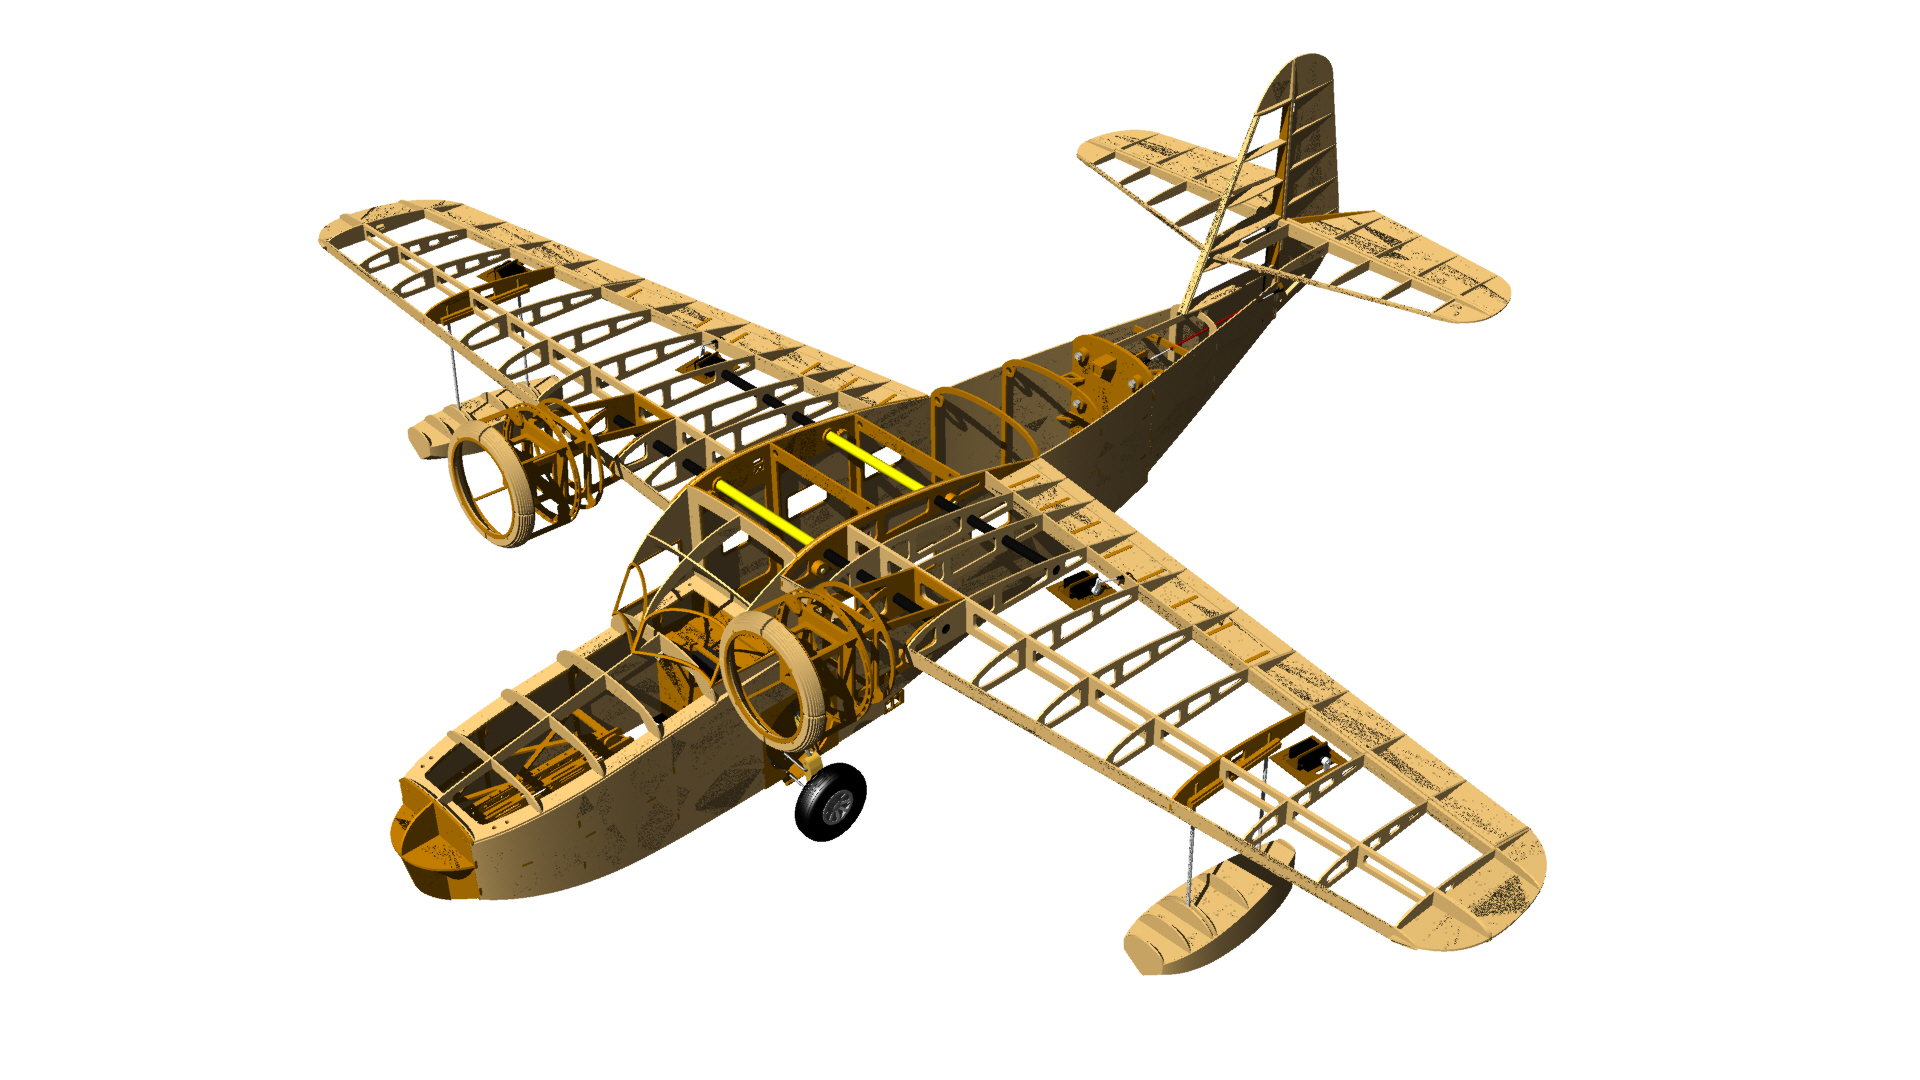 Welkom By Rc Europe Design And Manufacturing Of Lasercut Rc Planes